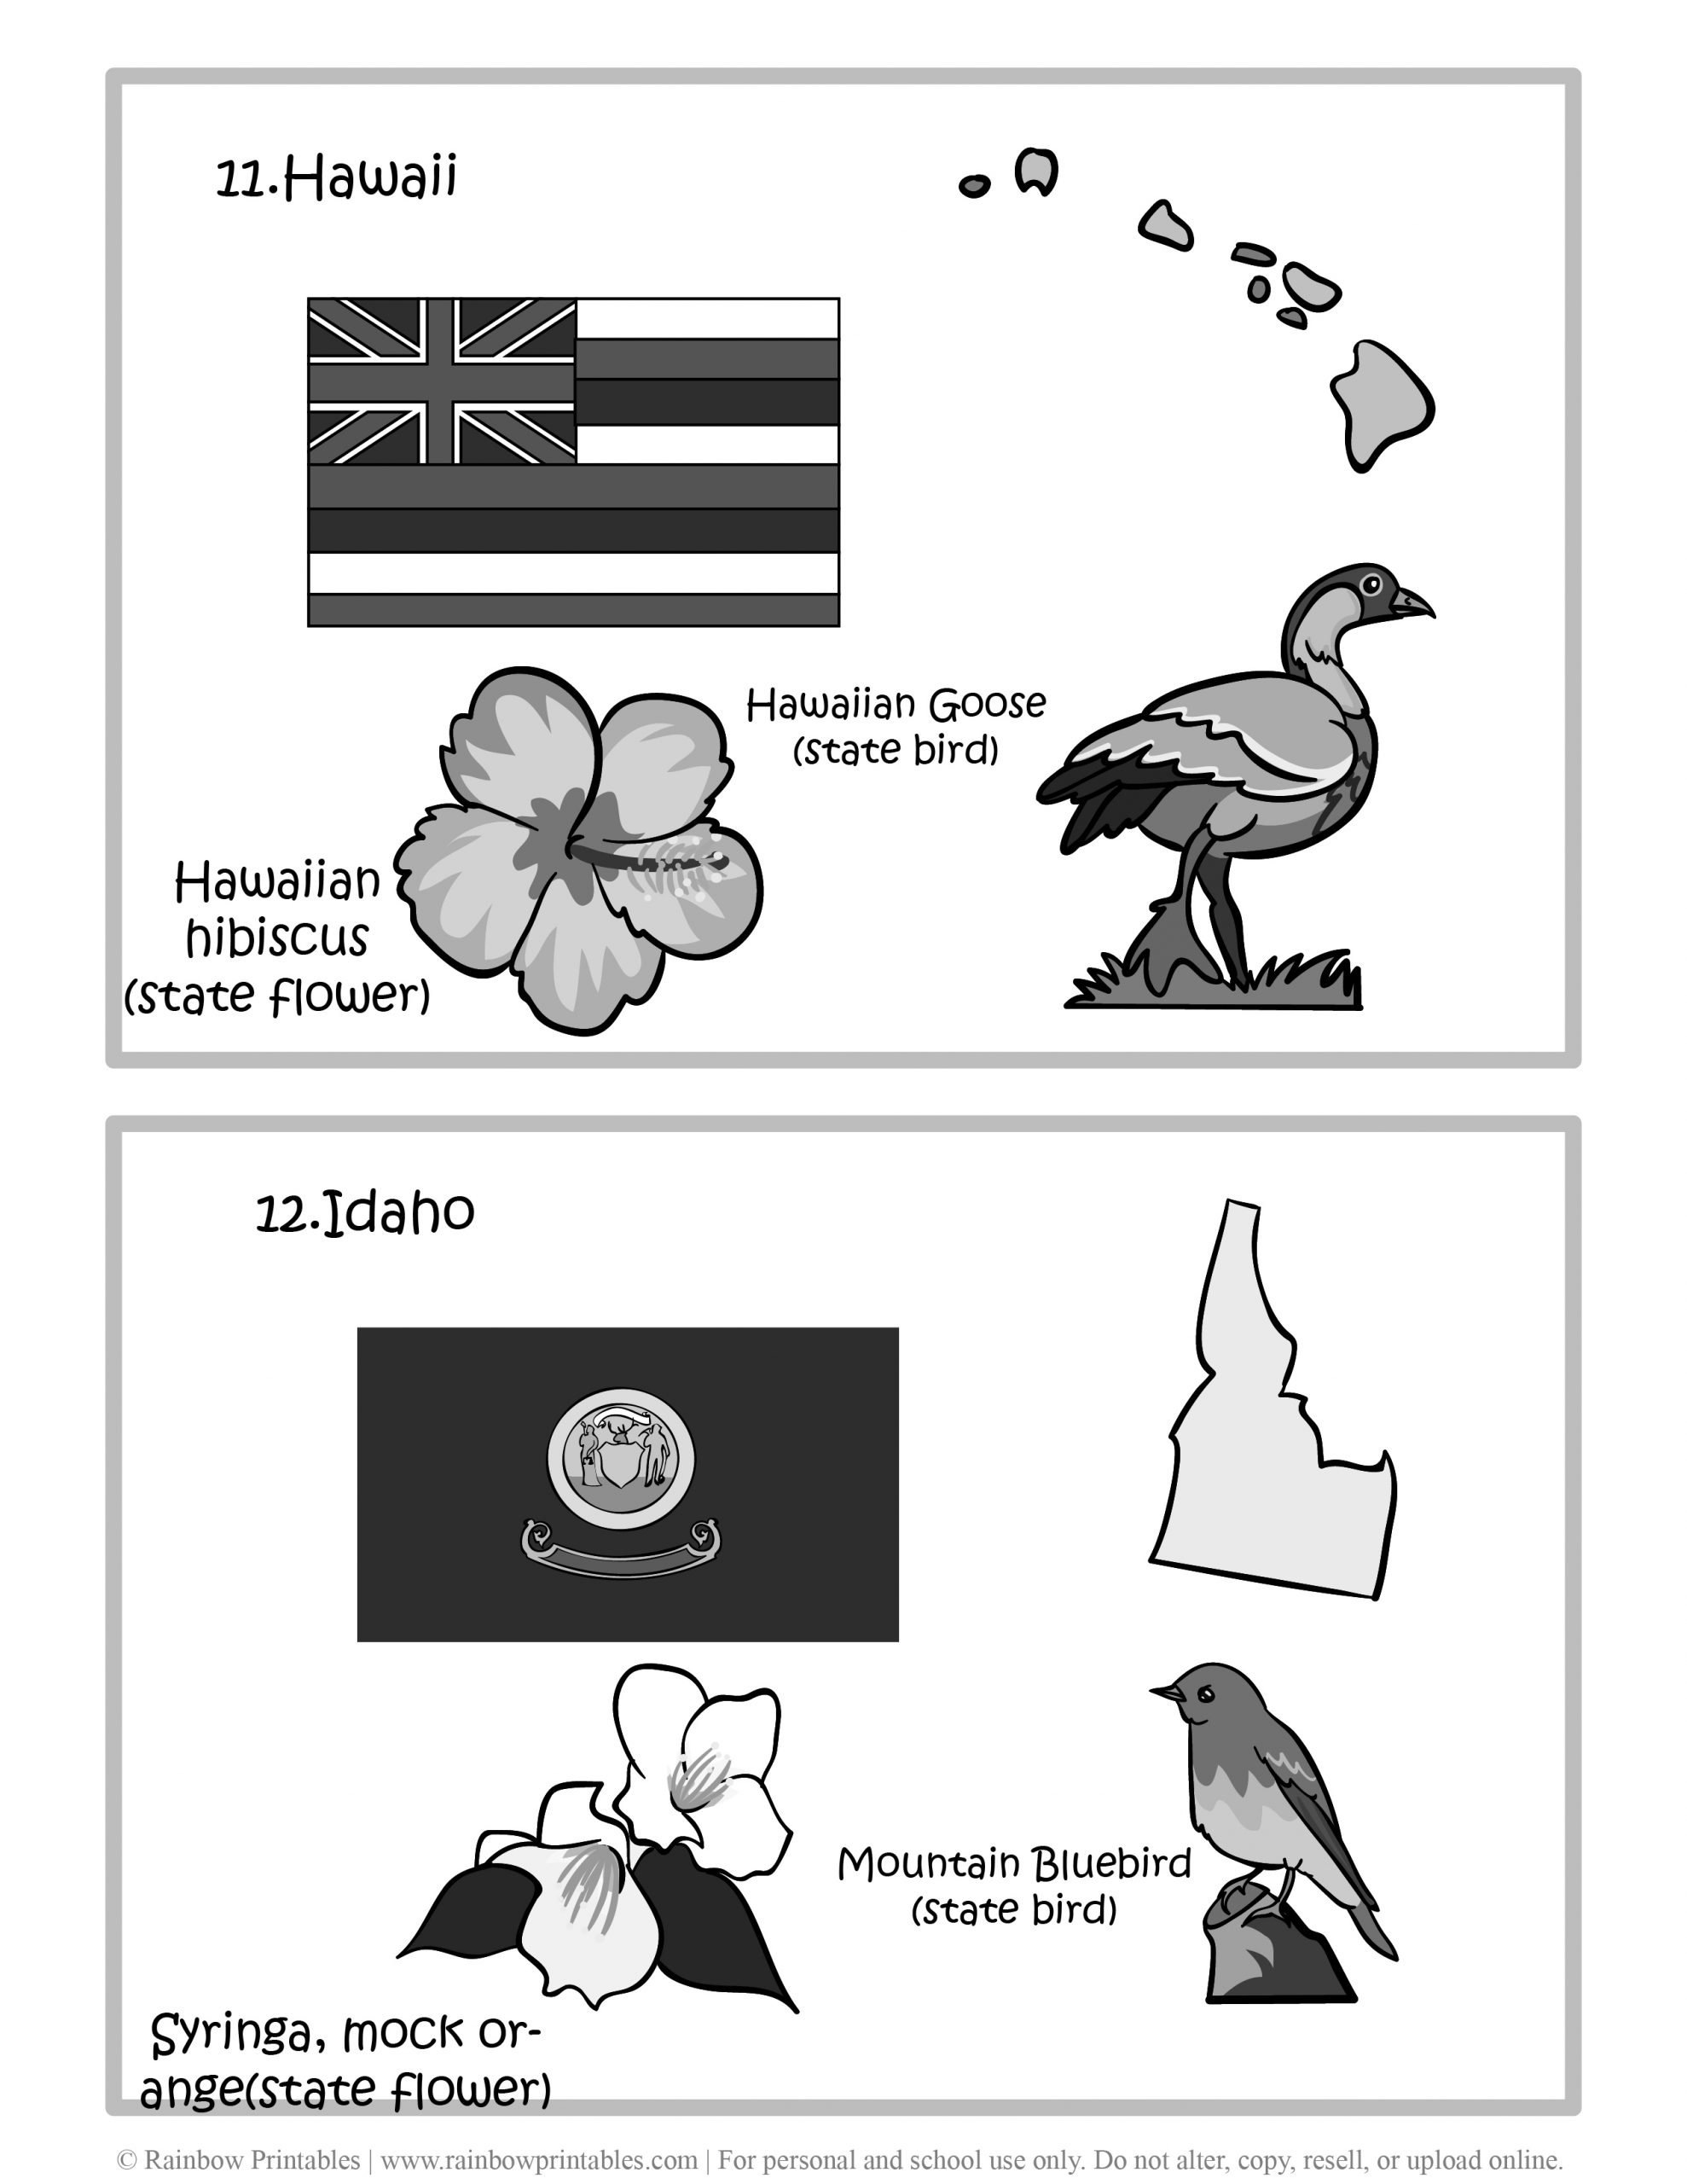 Hawaii, IDAHO, 50 US State Flag, State Bird, State Flower, United States of America - American States Geography Worksheet Class Lesson Printables Flashcards Black White